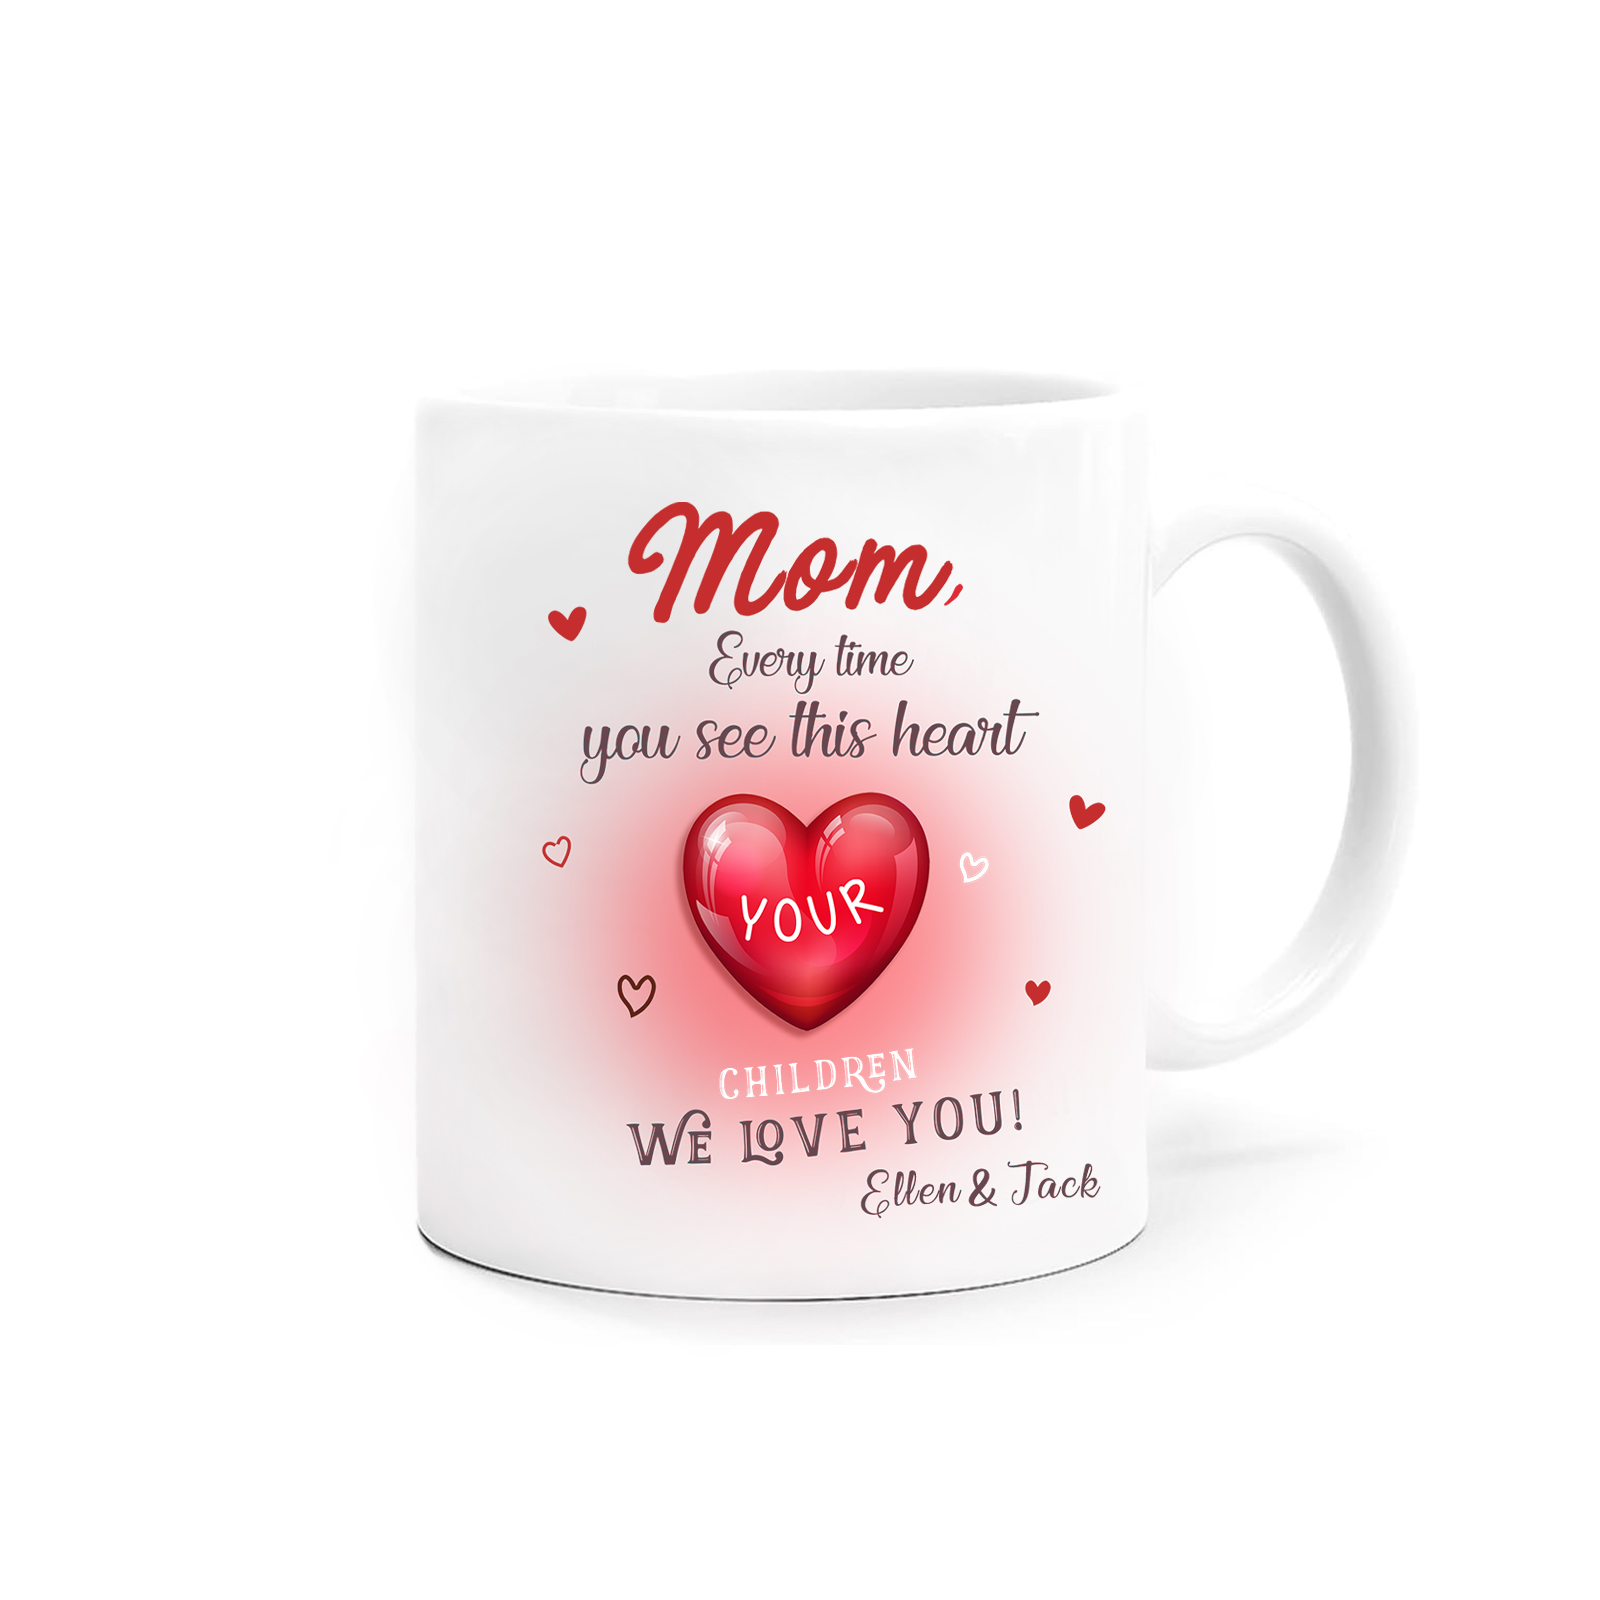 Personalized Custom Text Ceramic Cup with Exquisite Copywriting and Lo